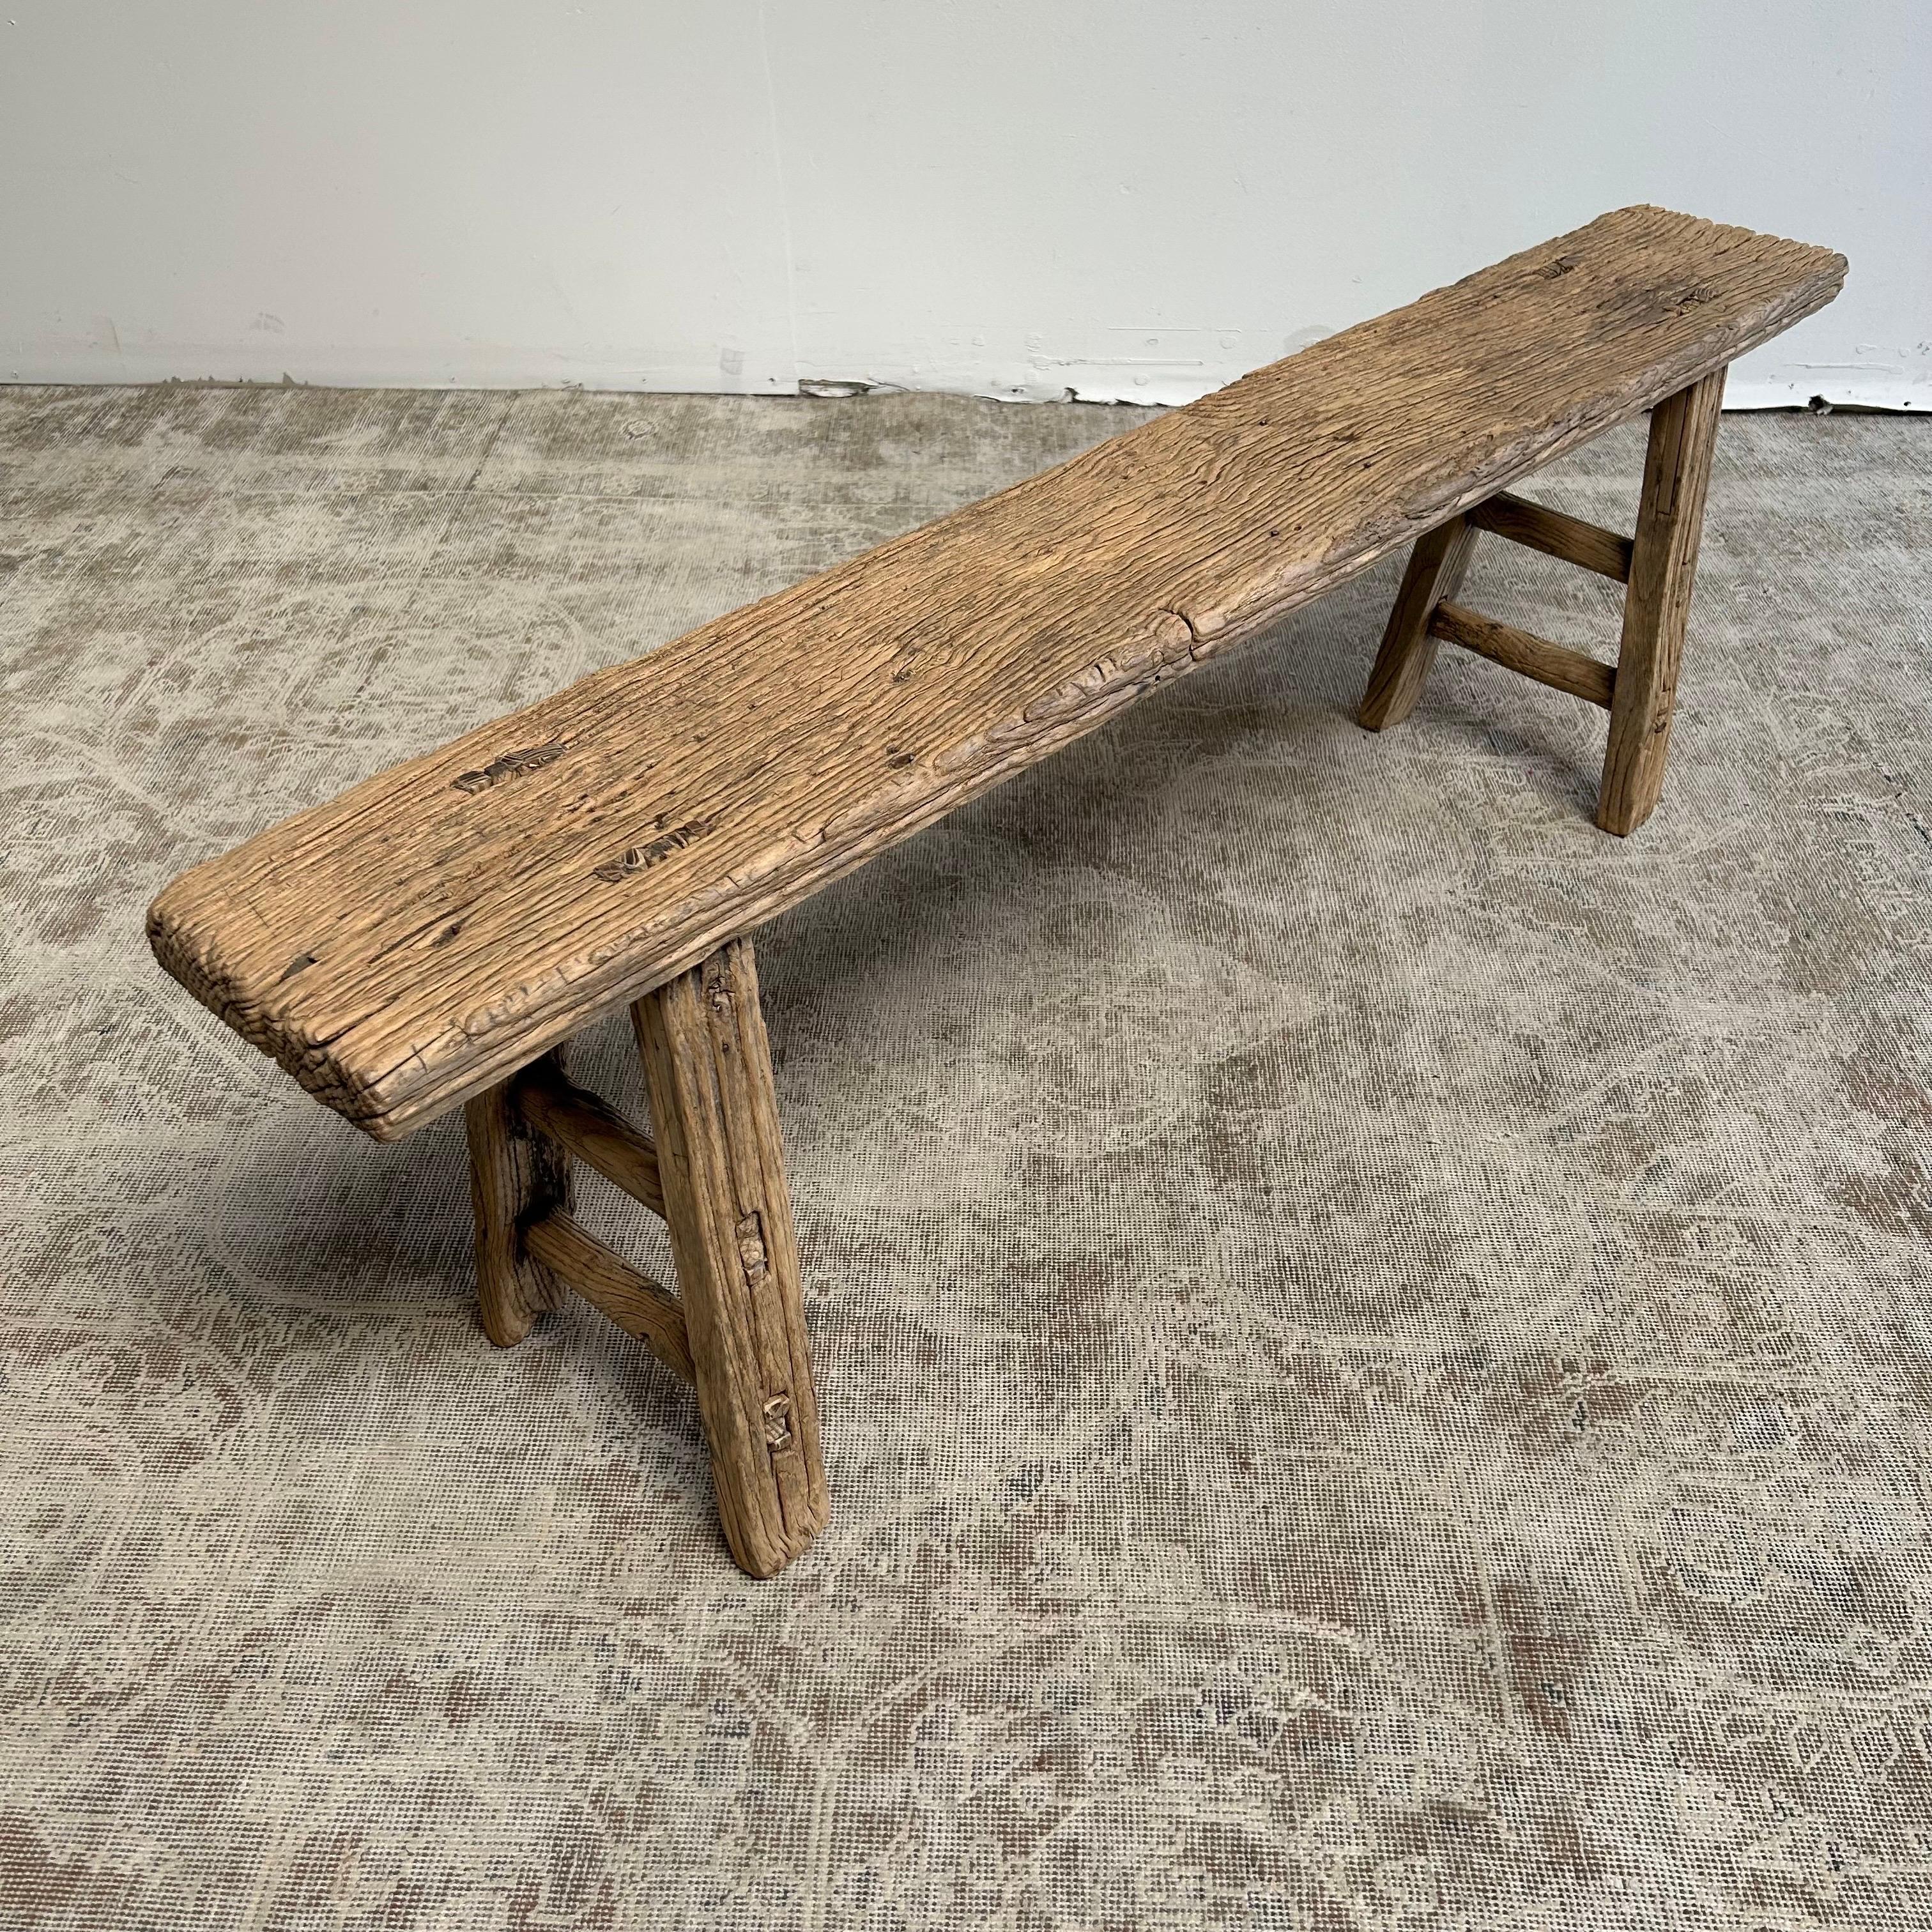 Organic Modern Vintage Elm Wood Bench with Aged Patina